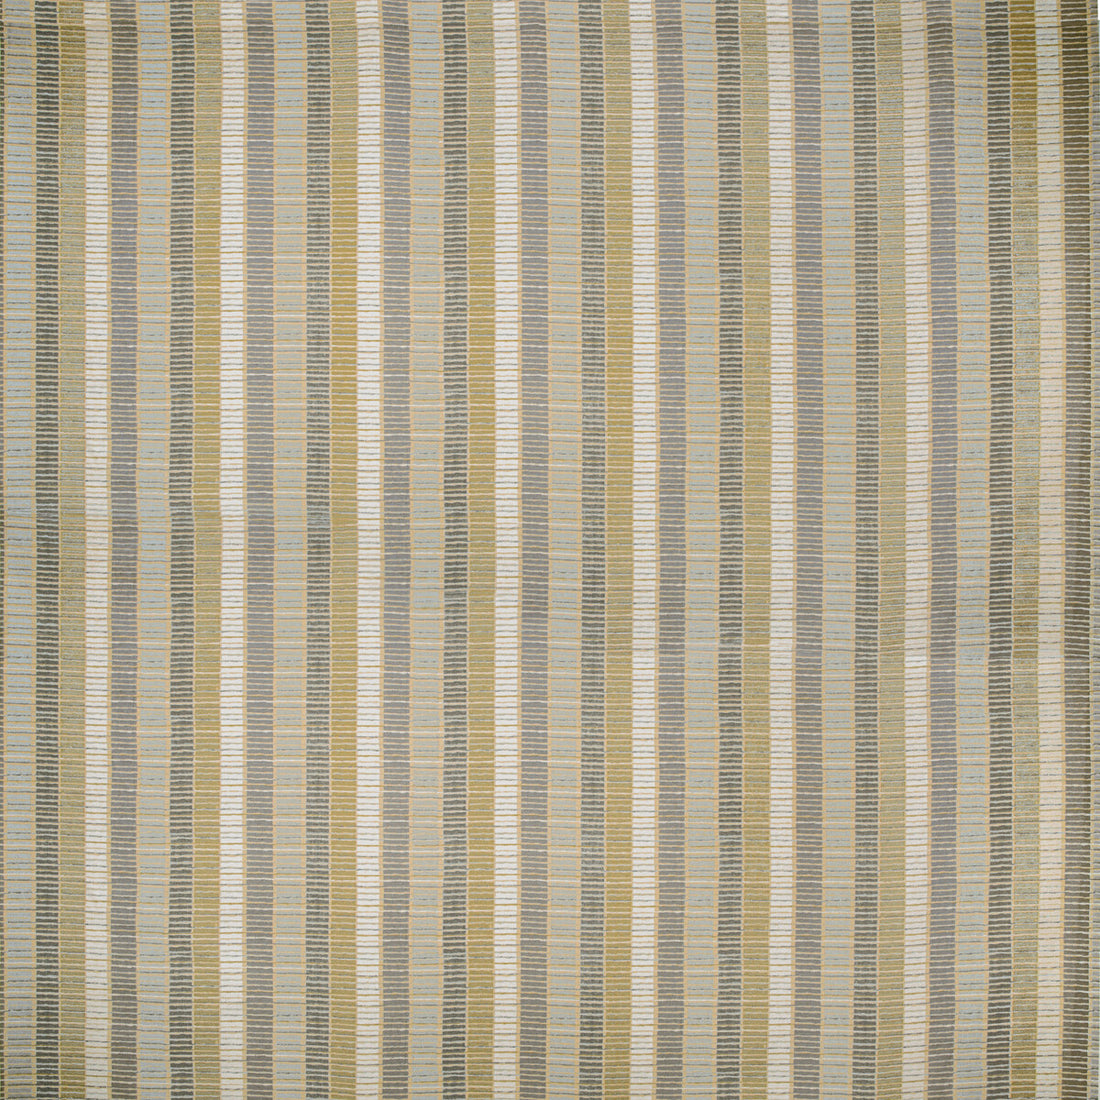 Atoll fabric in beach color - pattern 2019148.16.0 - by Lee Jofa Modern in the Kw Terra Firma III Indoor Outdoor collection